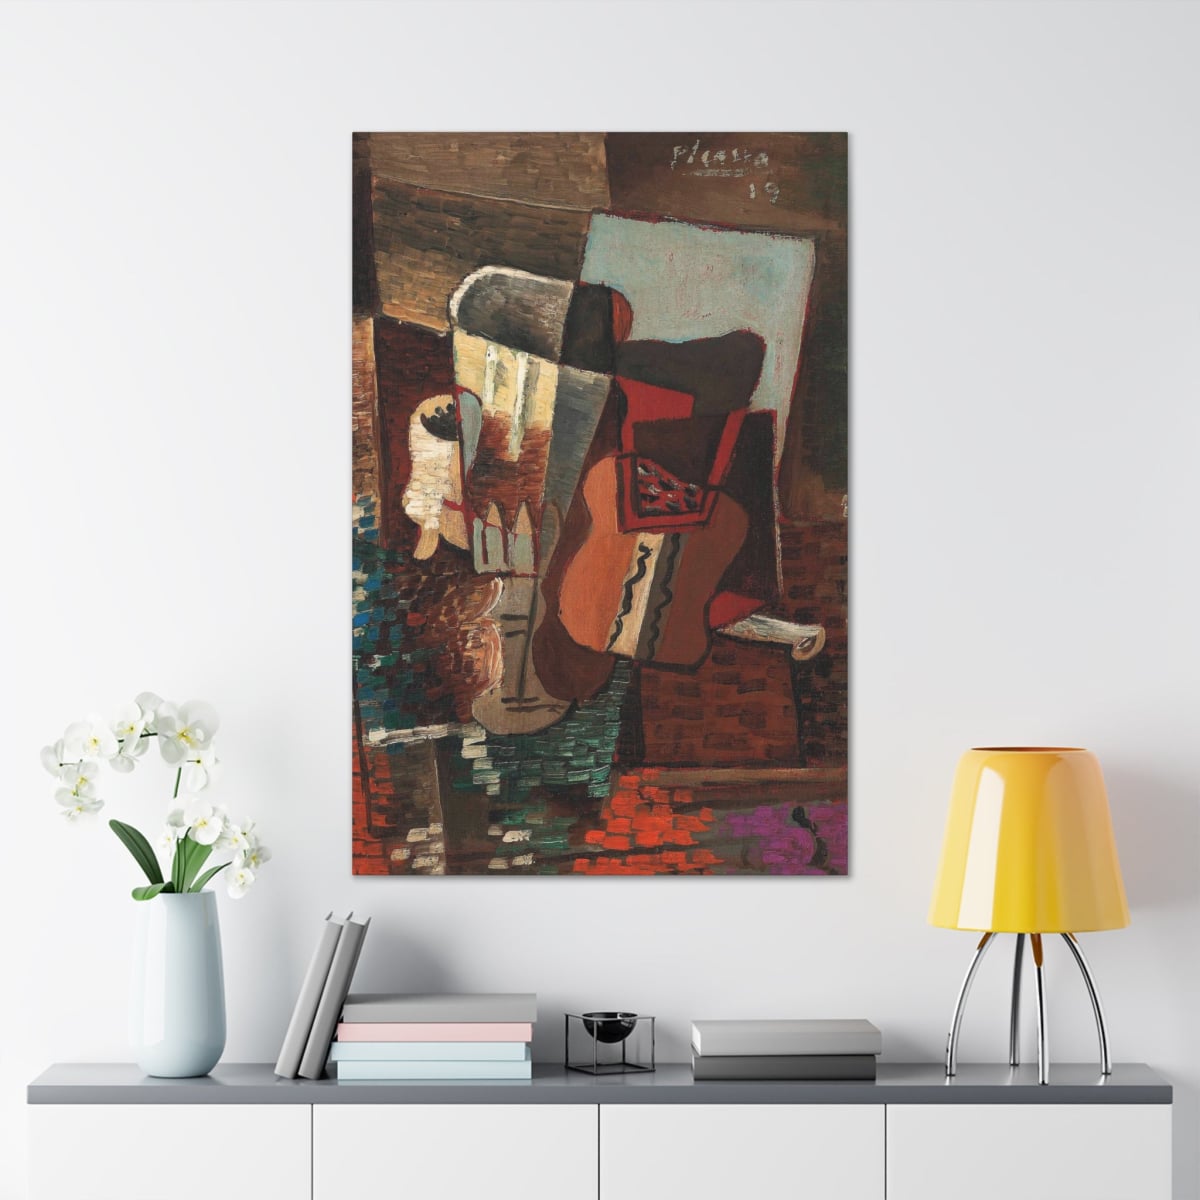 Own a Piece of Picasso - Canvas Gallery Wraps of Glass Pipe Tobacco